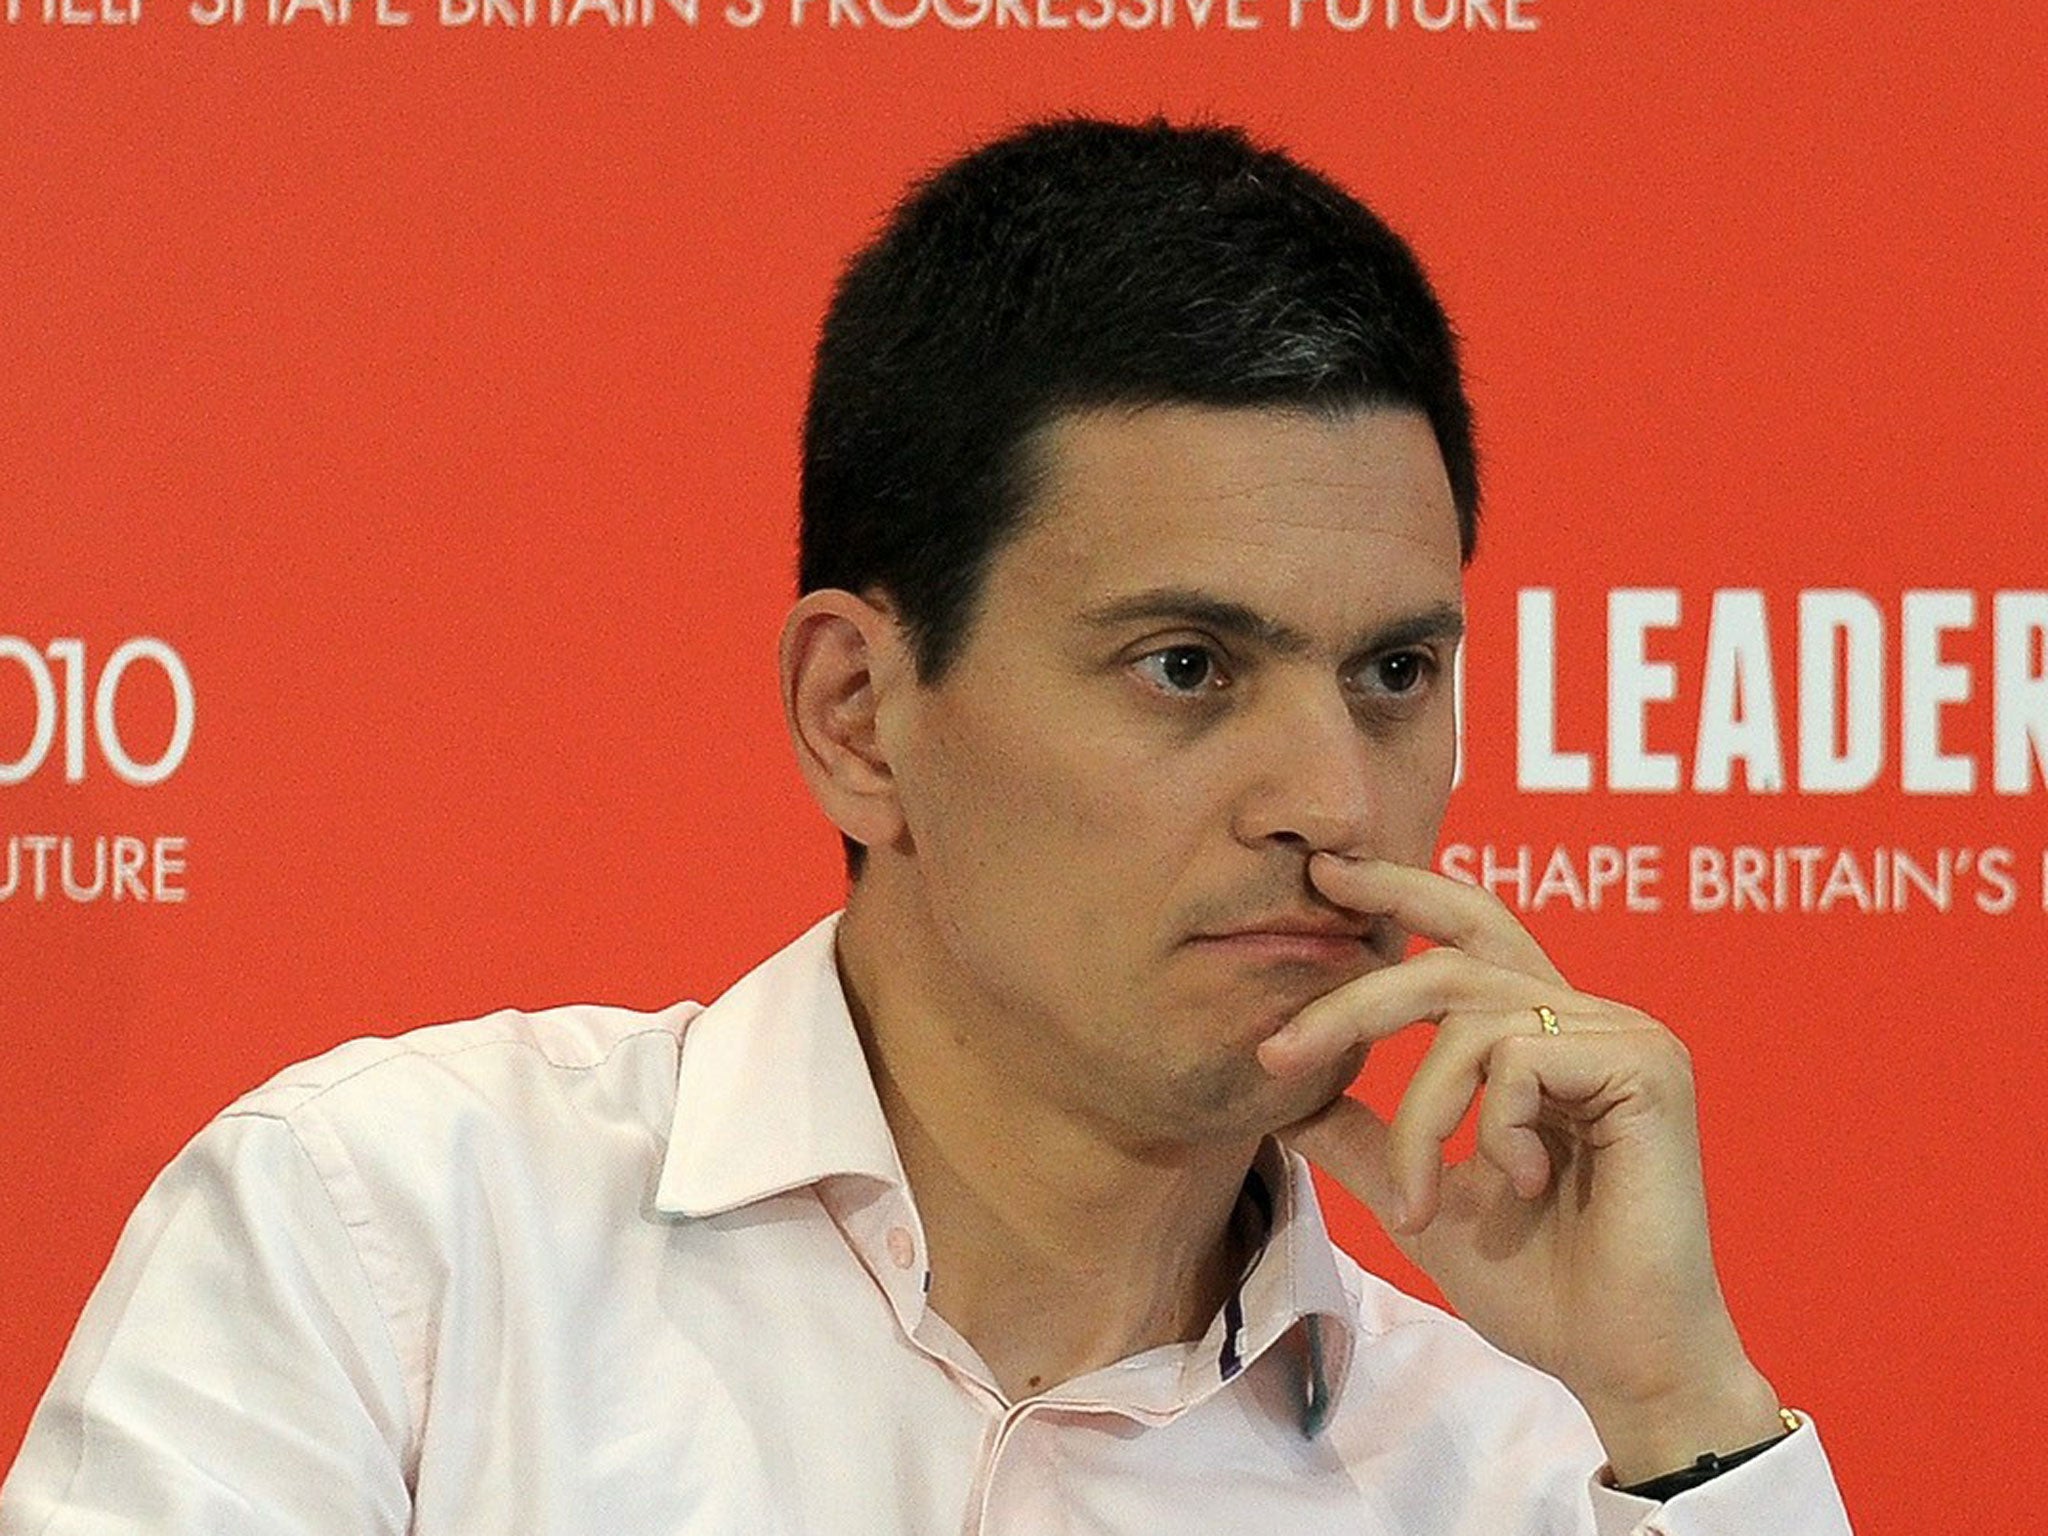 Union support helped Ed Miliband defeat brother David, pictured in 2010